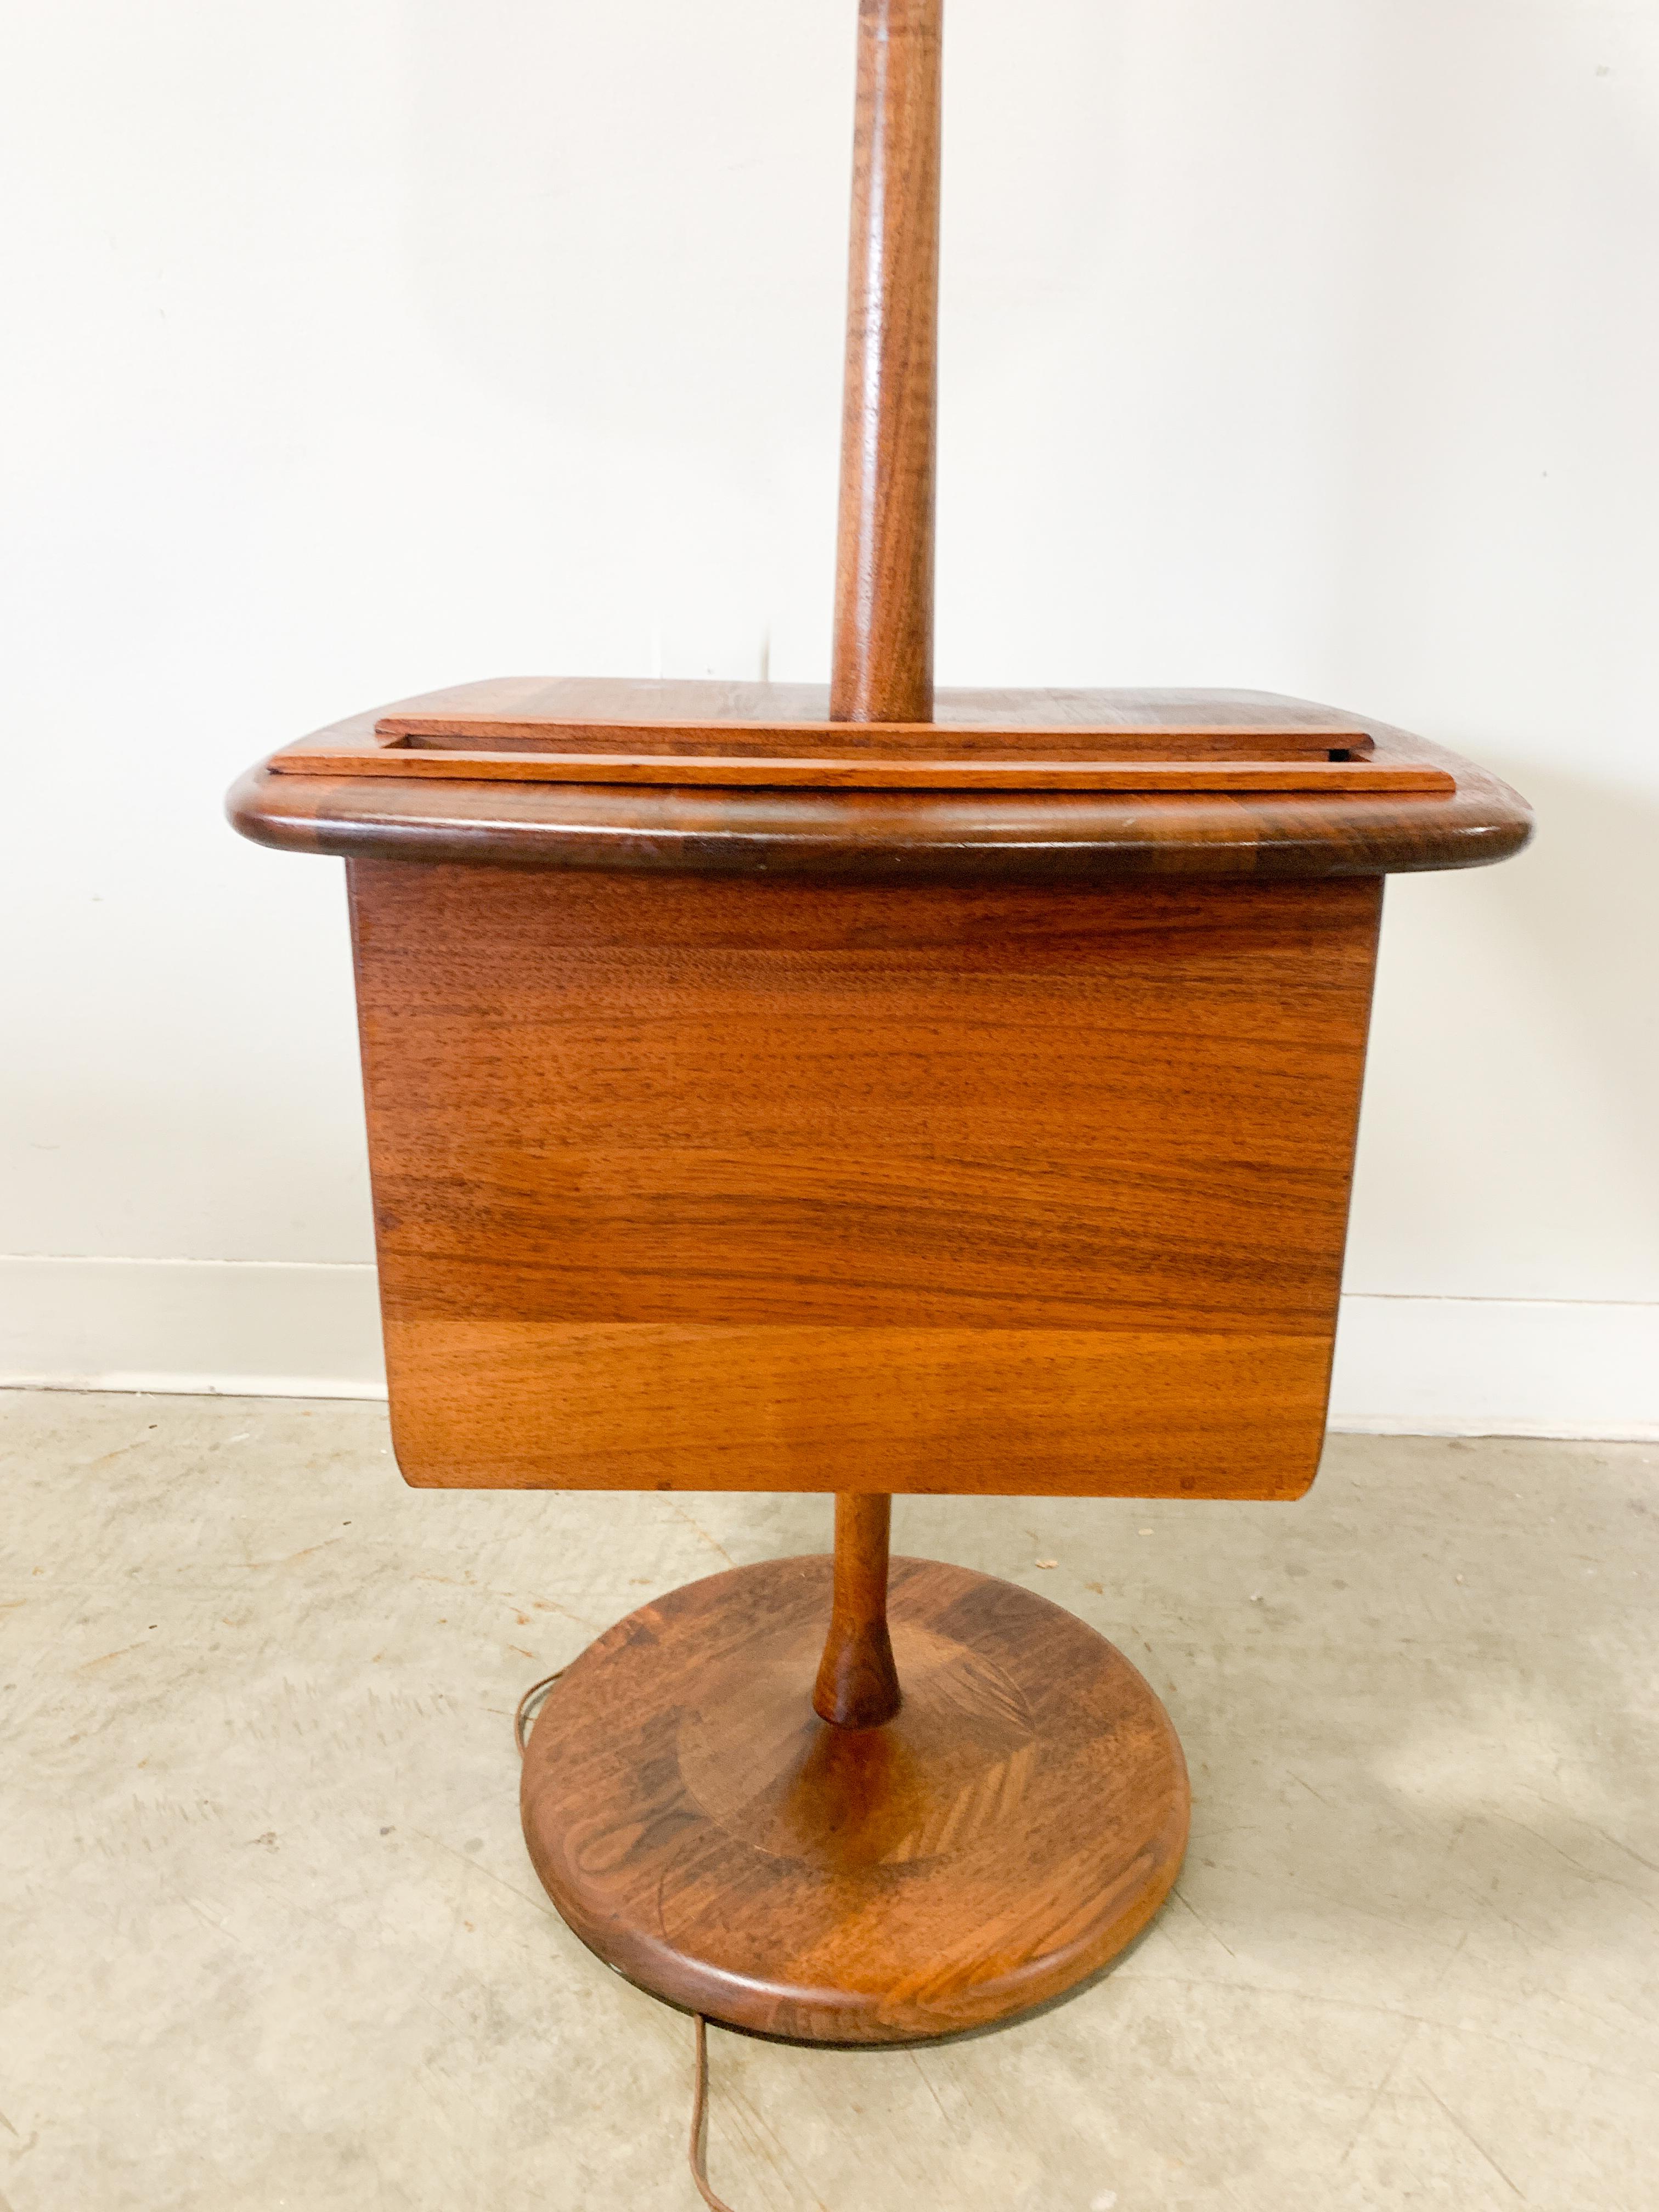 Beautiful solid walnut lamp table with built-in magazine or book rack. This classic mid-century modern design from the Laurel Lamp Company is functional and stylish with stunning wood grain. Vintage shade is in good condition with one or two